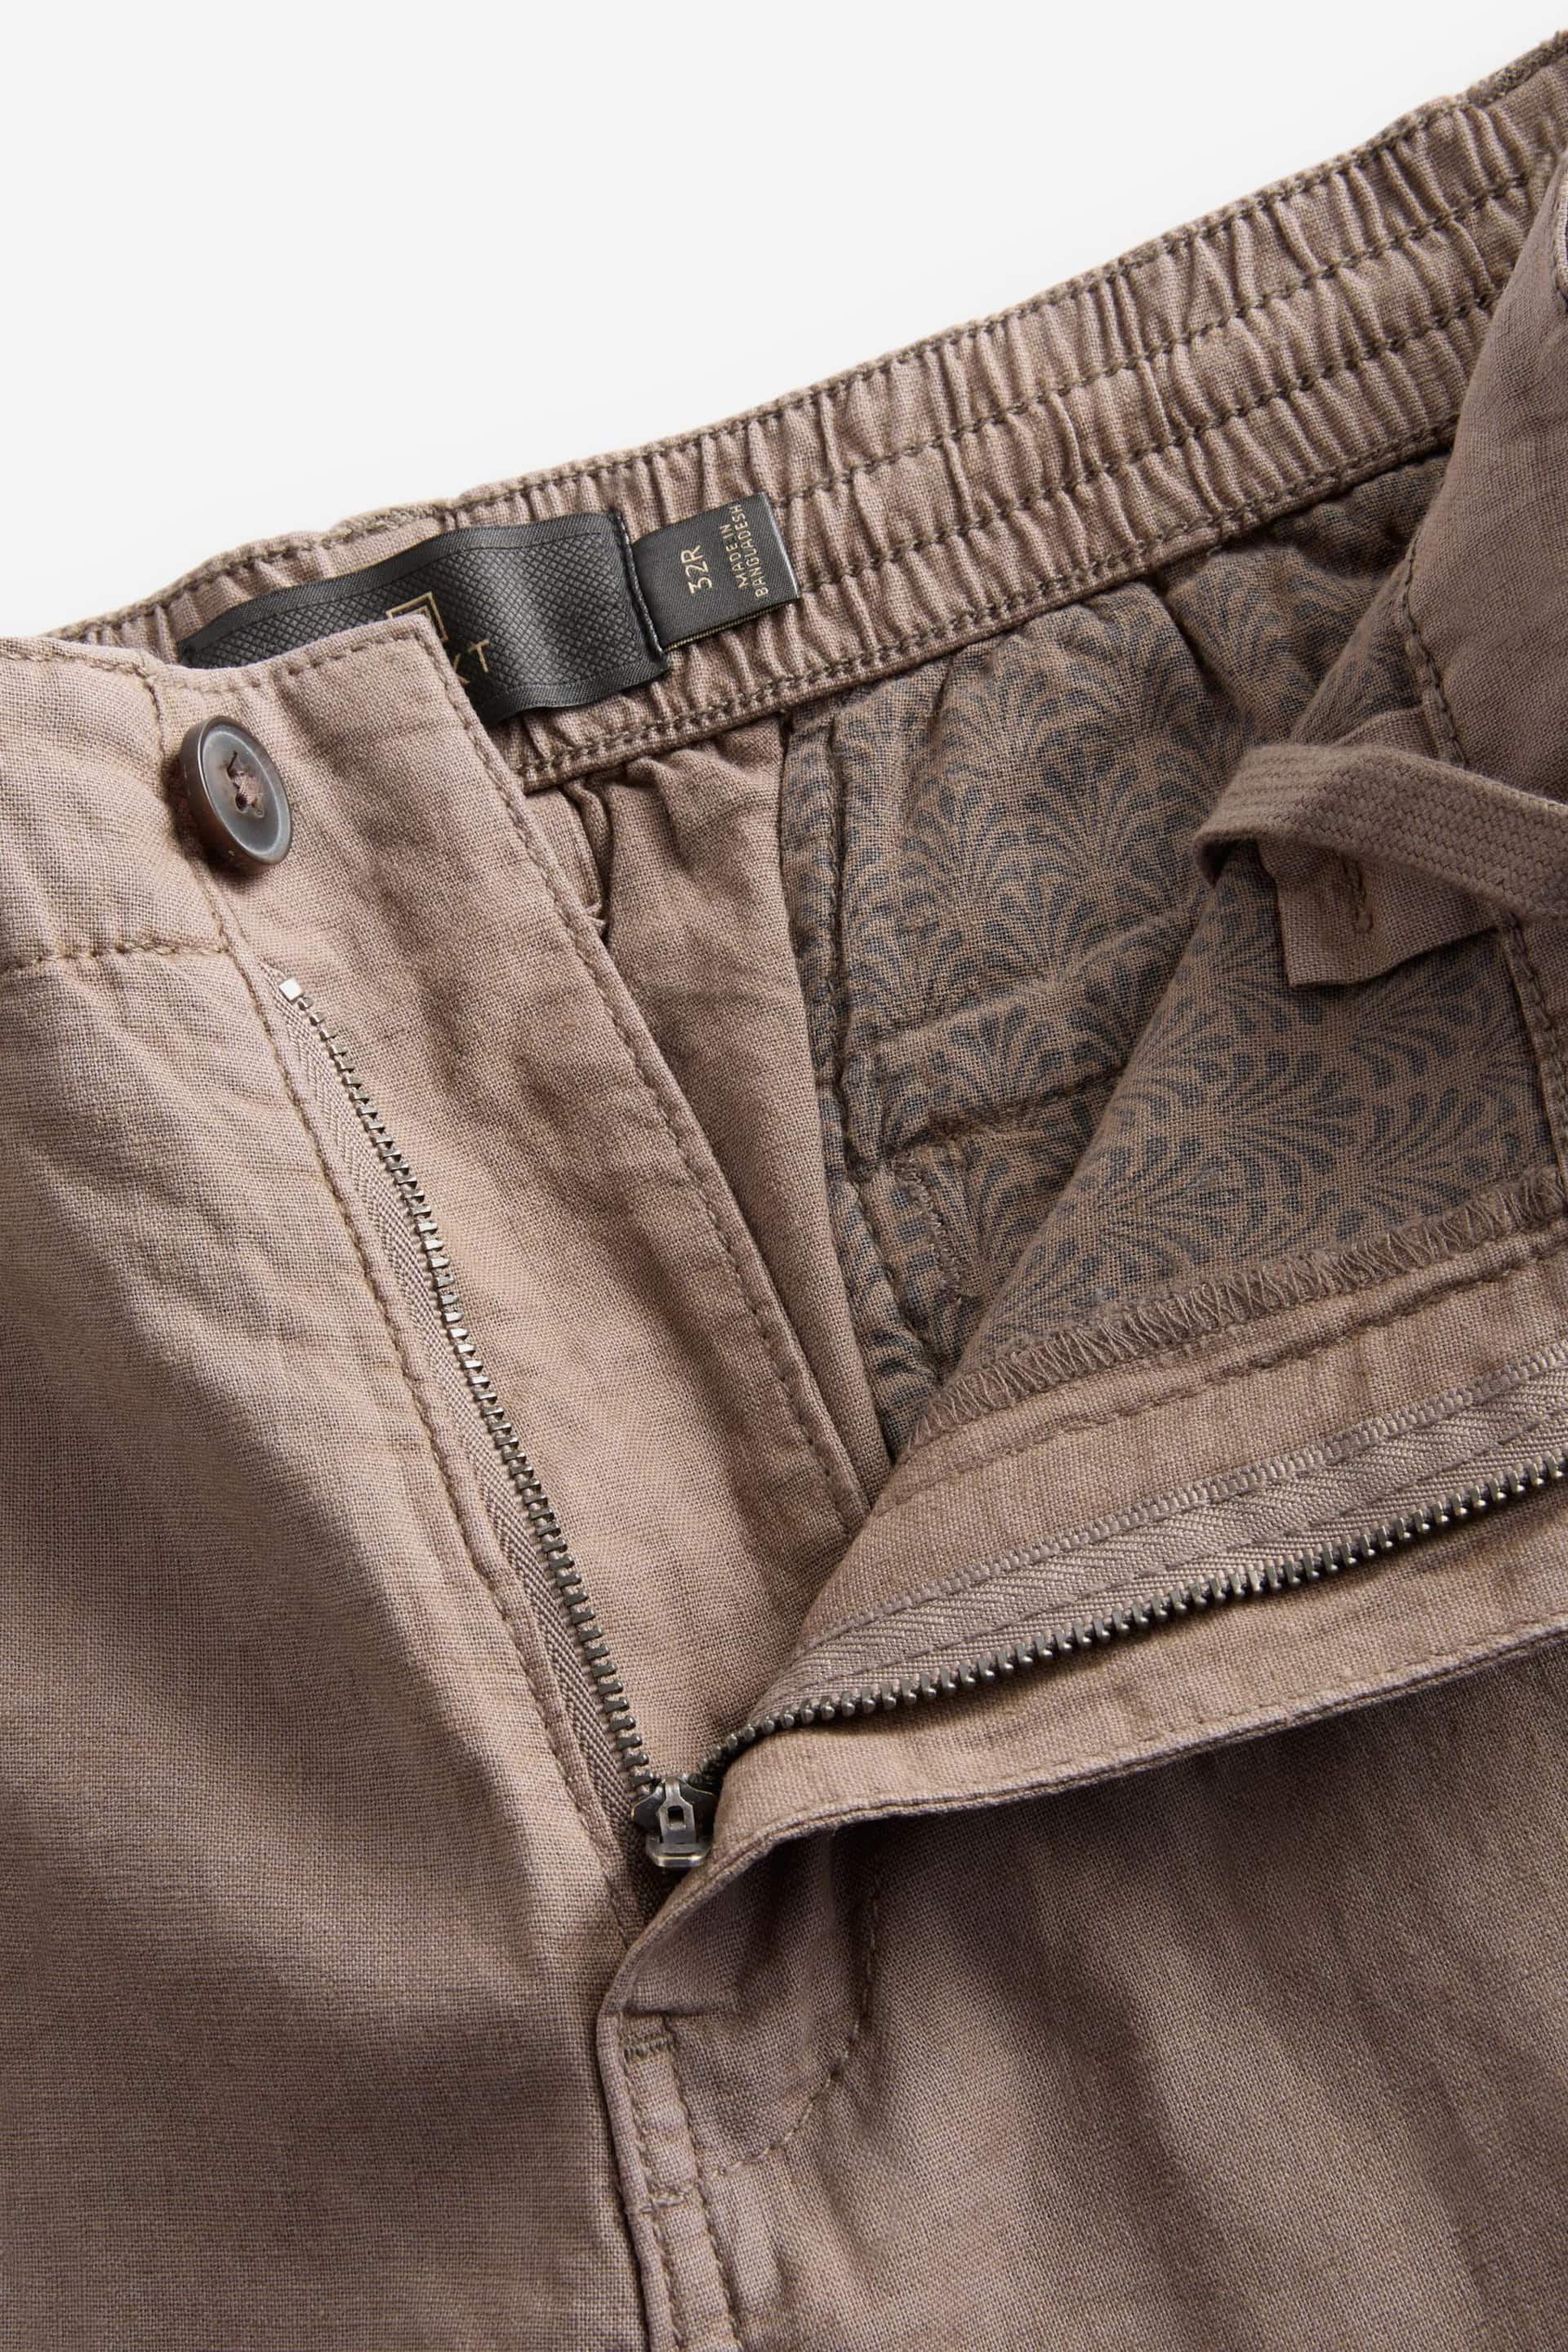 Brown Linen Blend Chino Shorts - Image 3 of 4